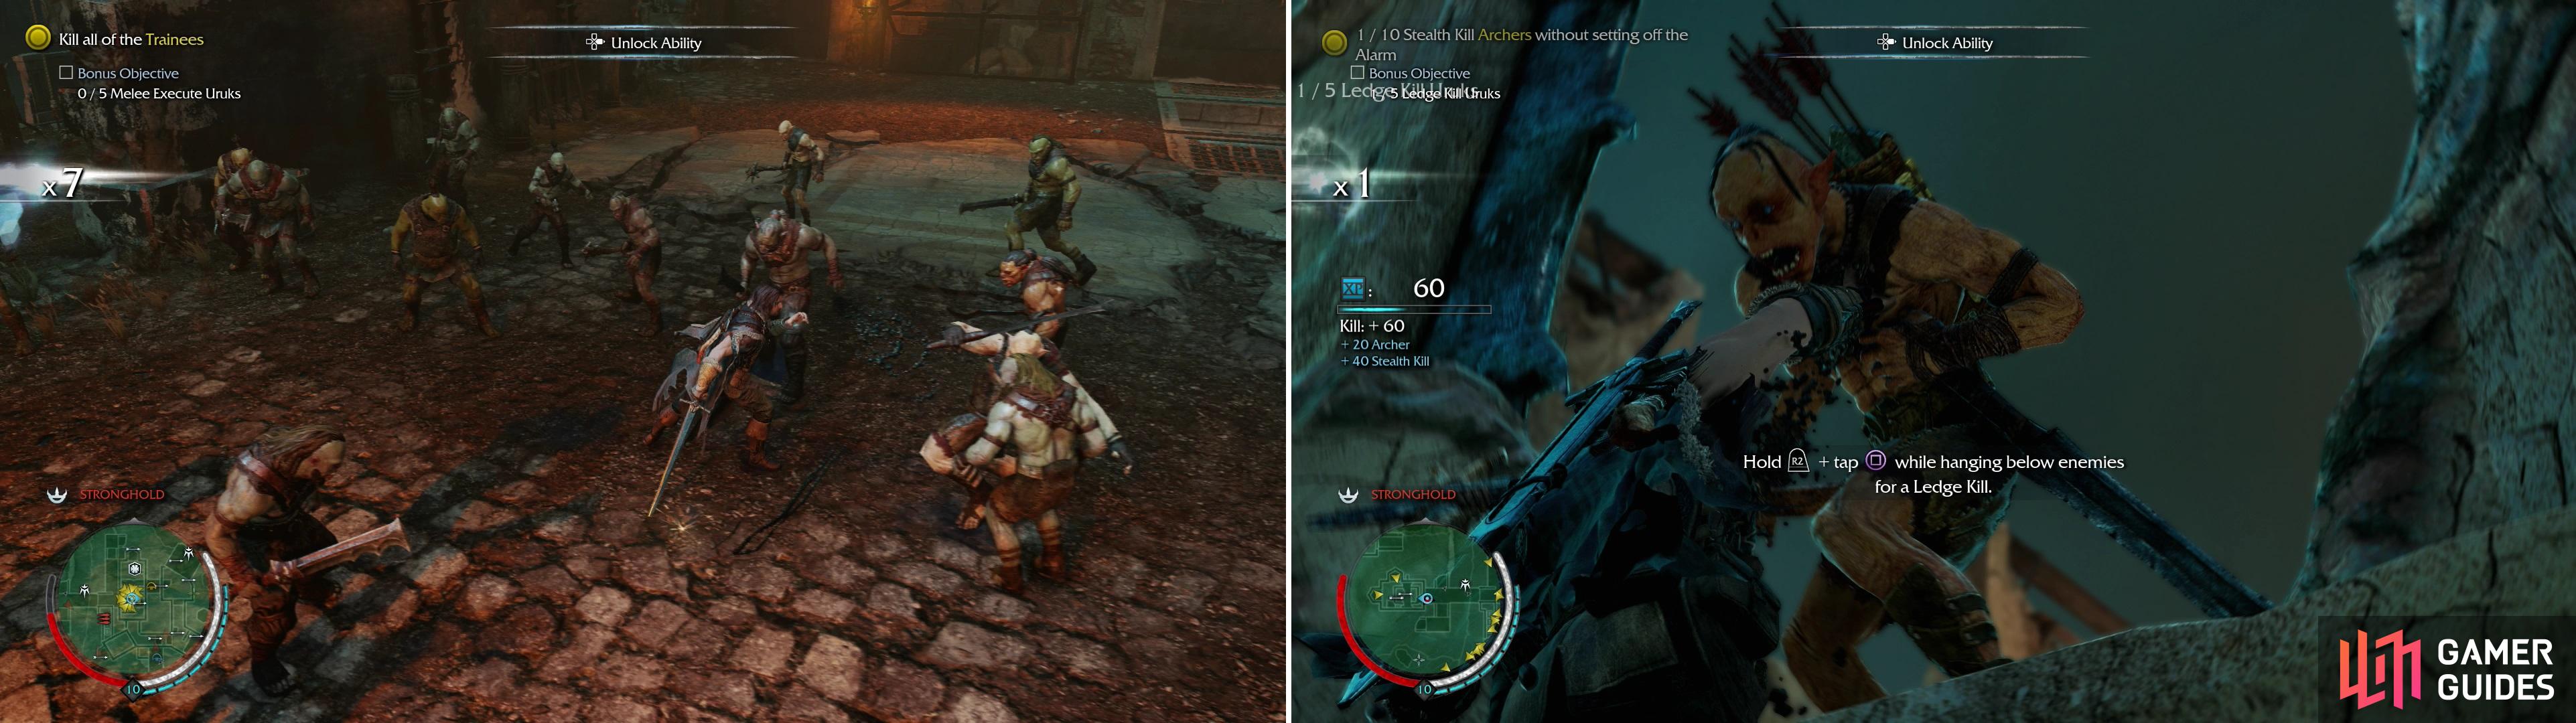 The Sword Mission "Cutting the Lines" tasks you with performing melee Executions while fighting off a horde of Uruks (left), skills that you must learn sooner or later. "Clear the Skies" tests your ability to sneakily Ledge Kill archers (right).